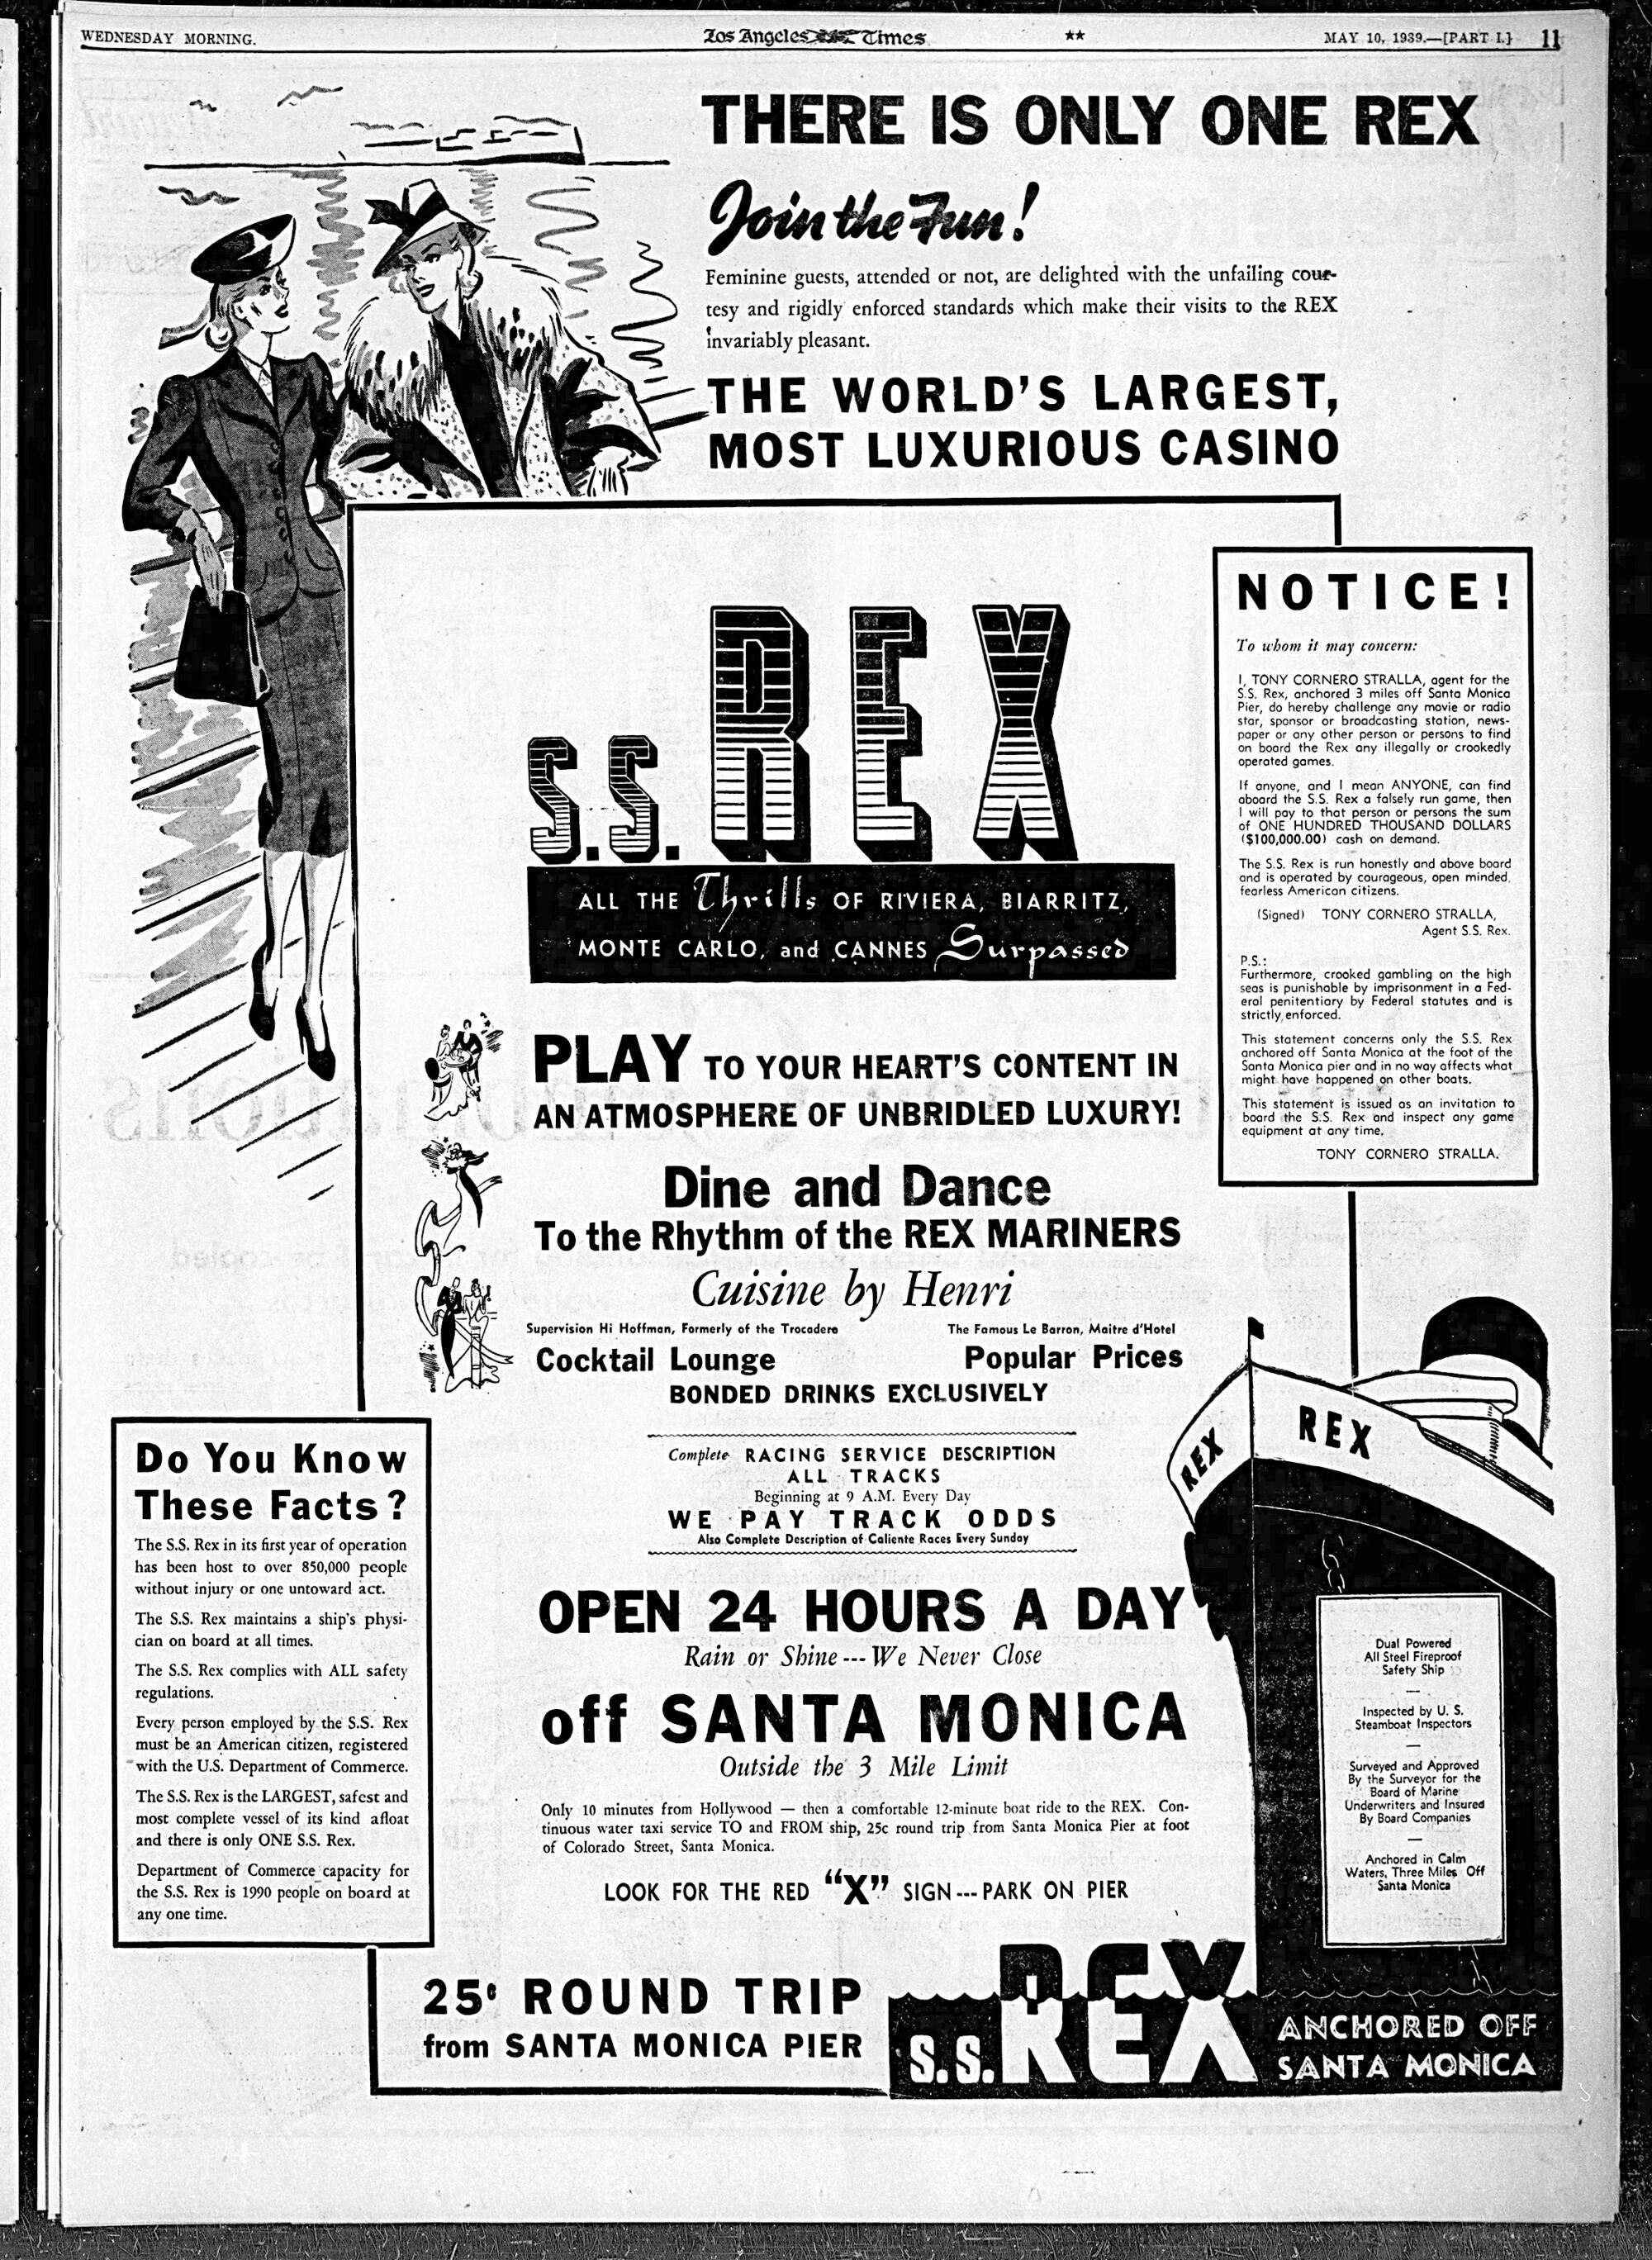 A 1939 advertisement for Tony Cornero's S.S. Rex gambling ship that appeared in the Los Angeles Times.